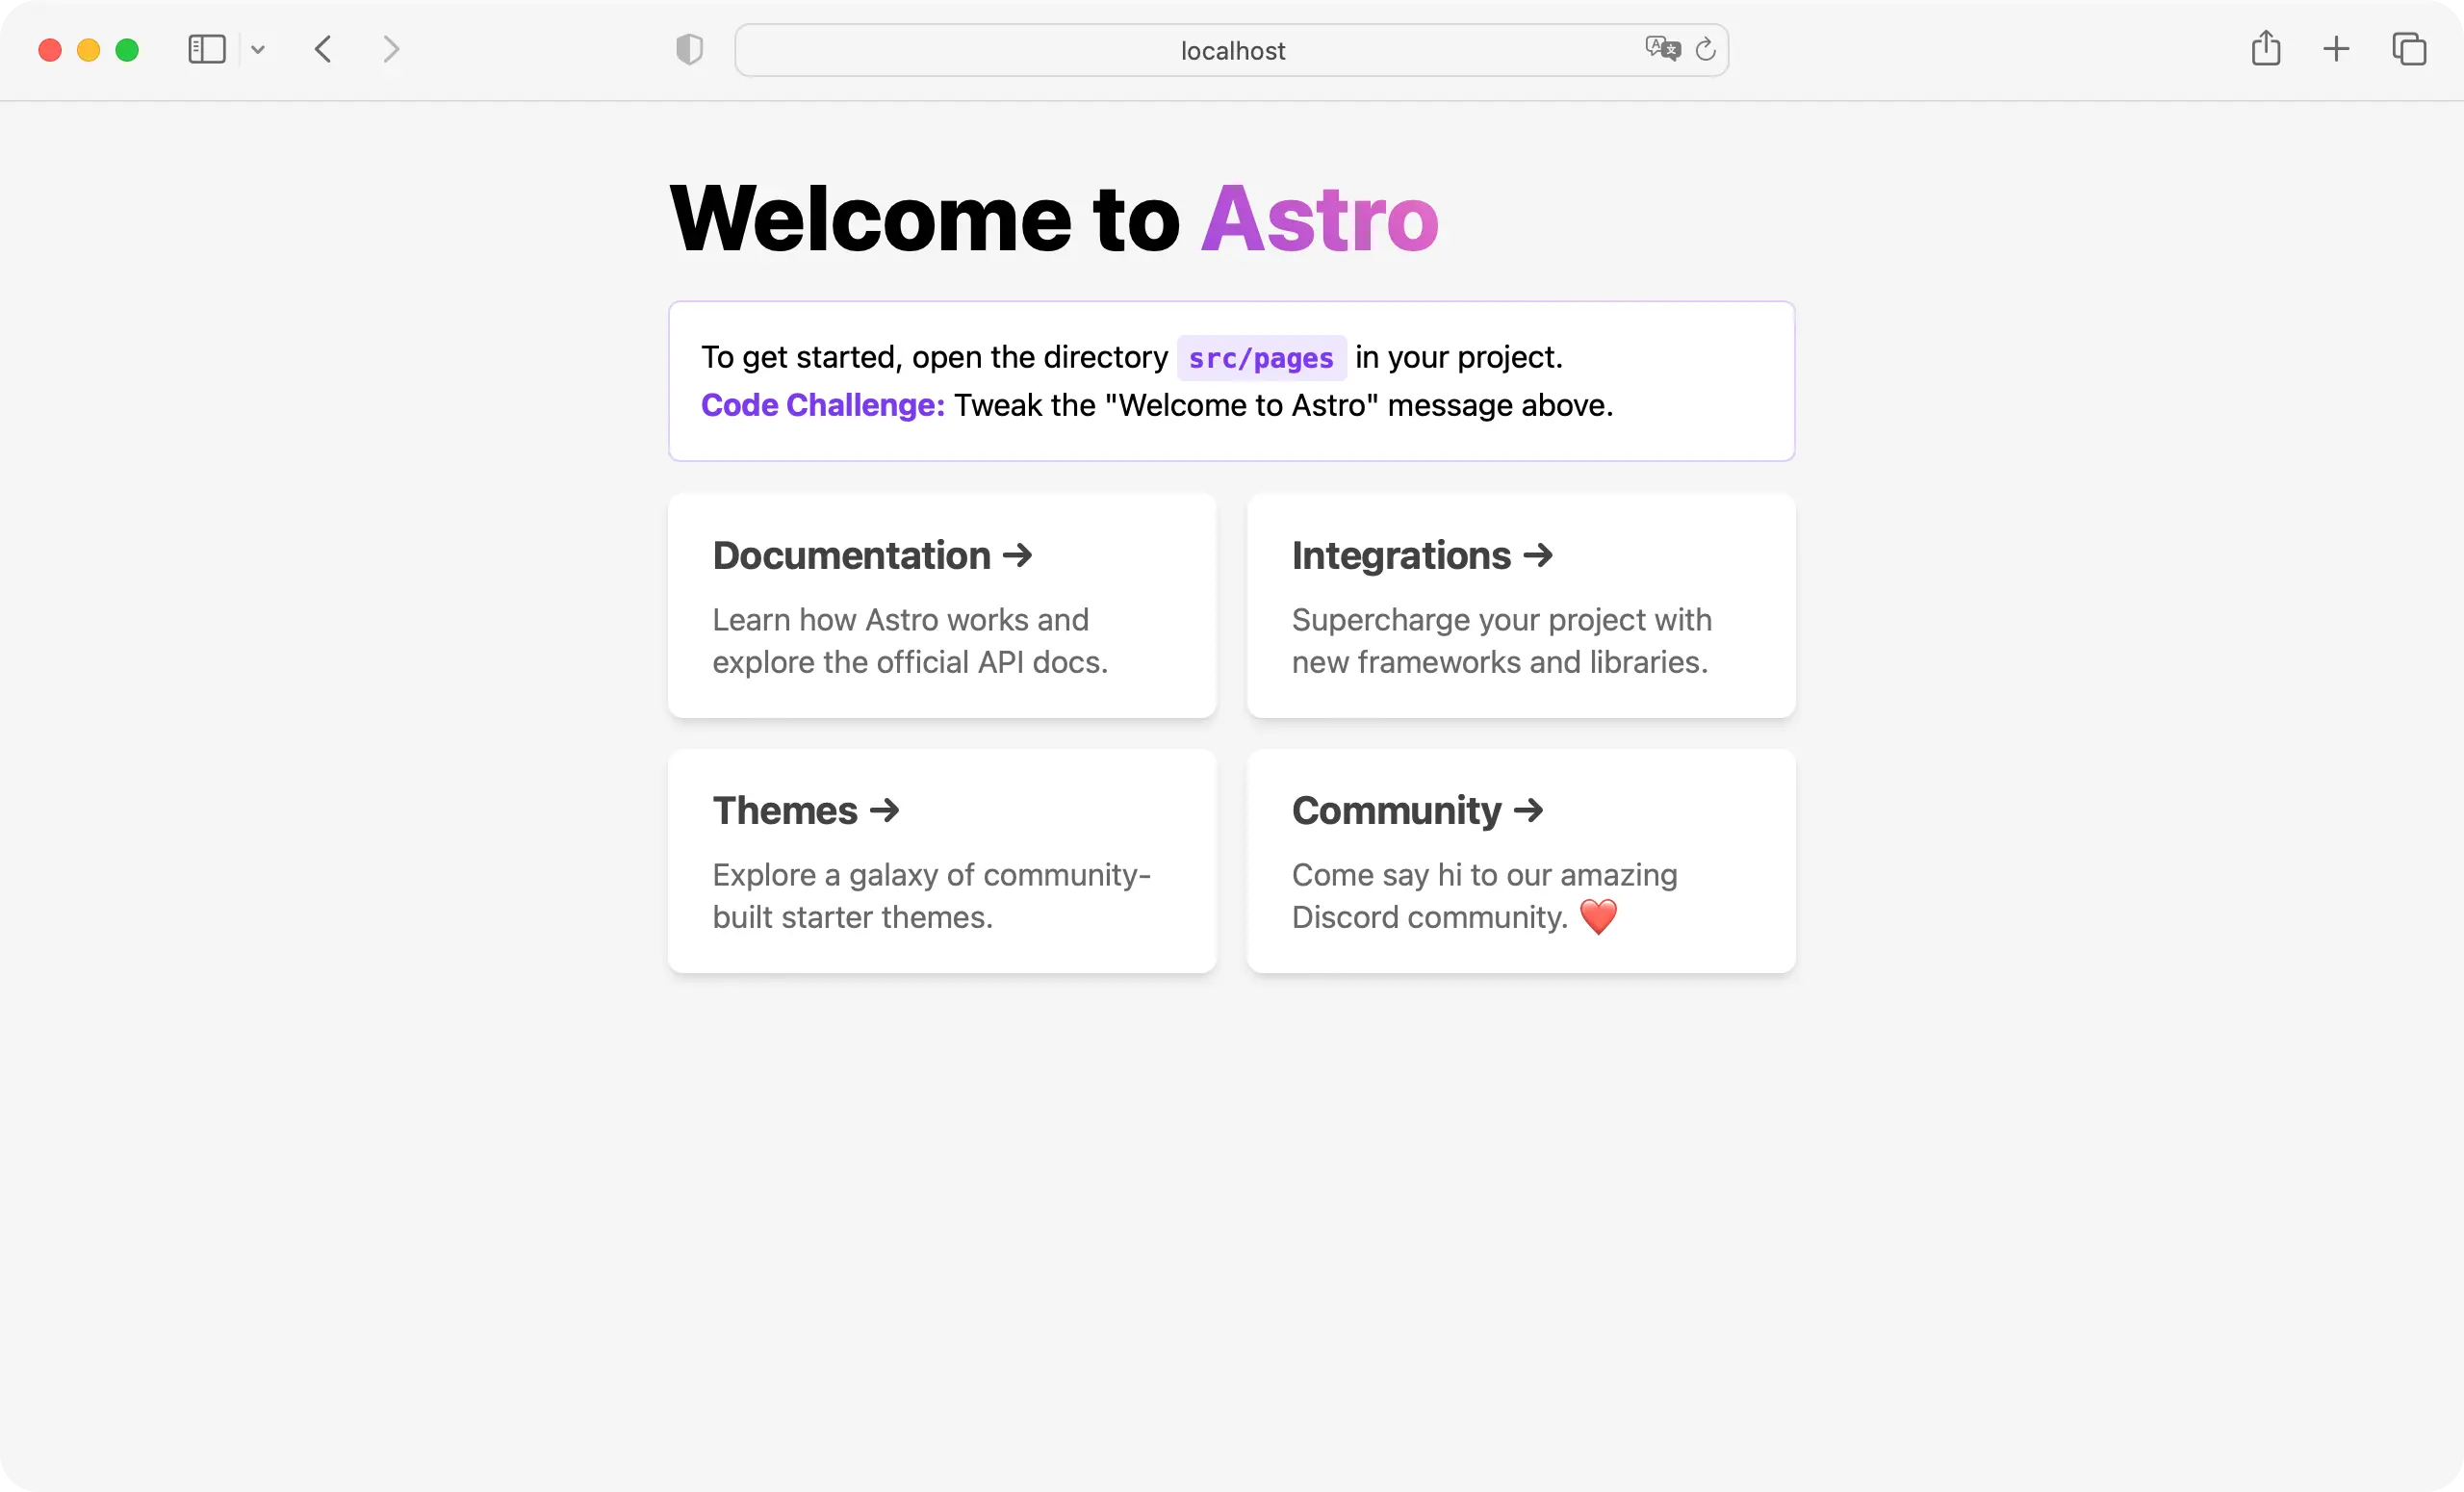 astro-home-page.png